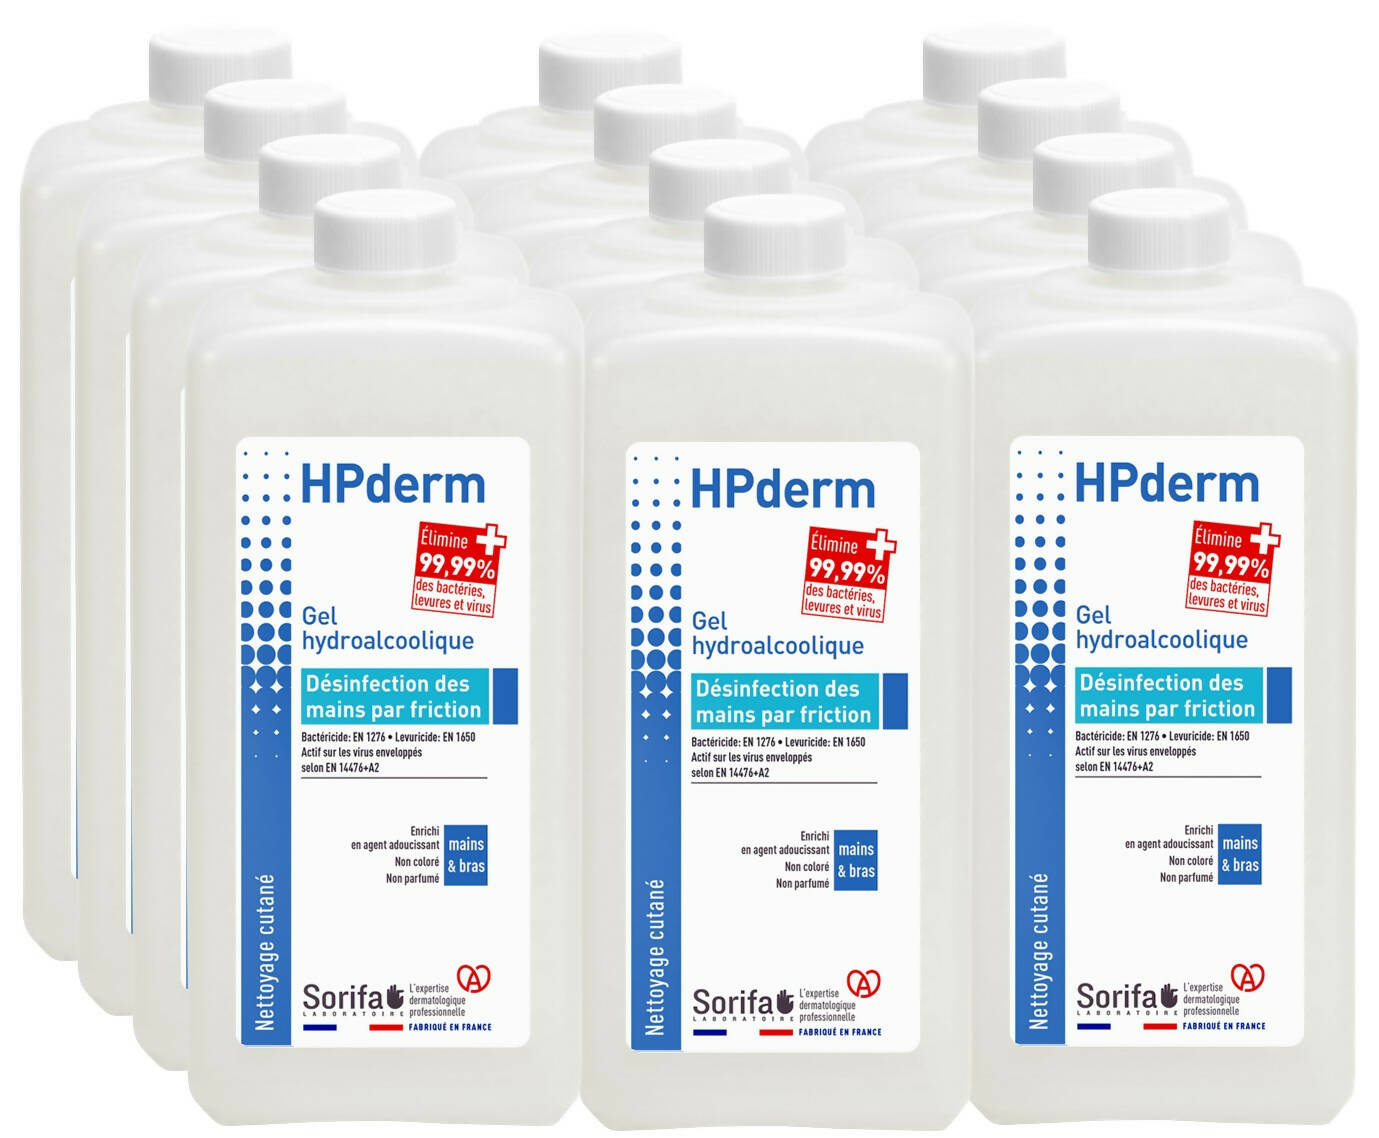 SORIFA – Complete box of 12 - HPderm Hydroalcoholic gel - Hand disinfection by friction - Hands, arms - Enriched with glycerin - Fragrance-free - 1L bottle